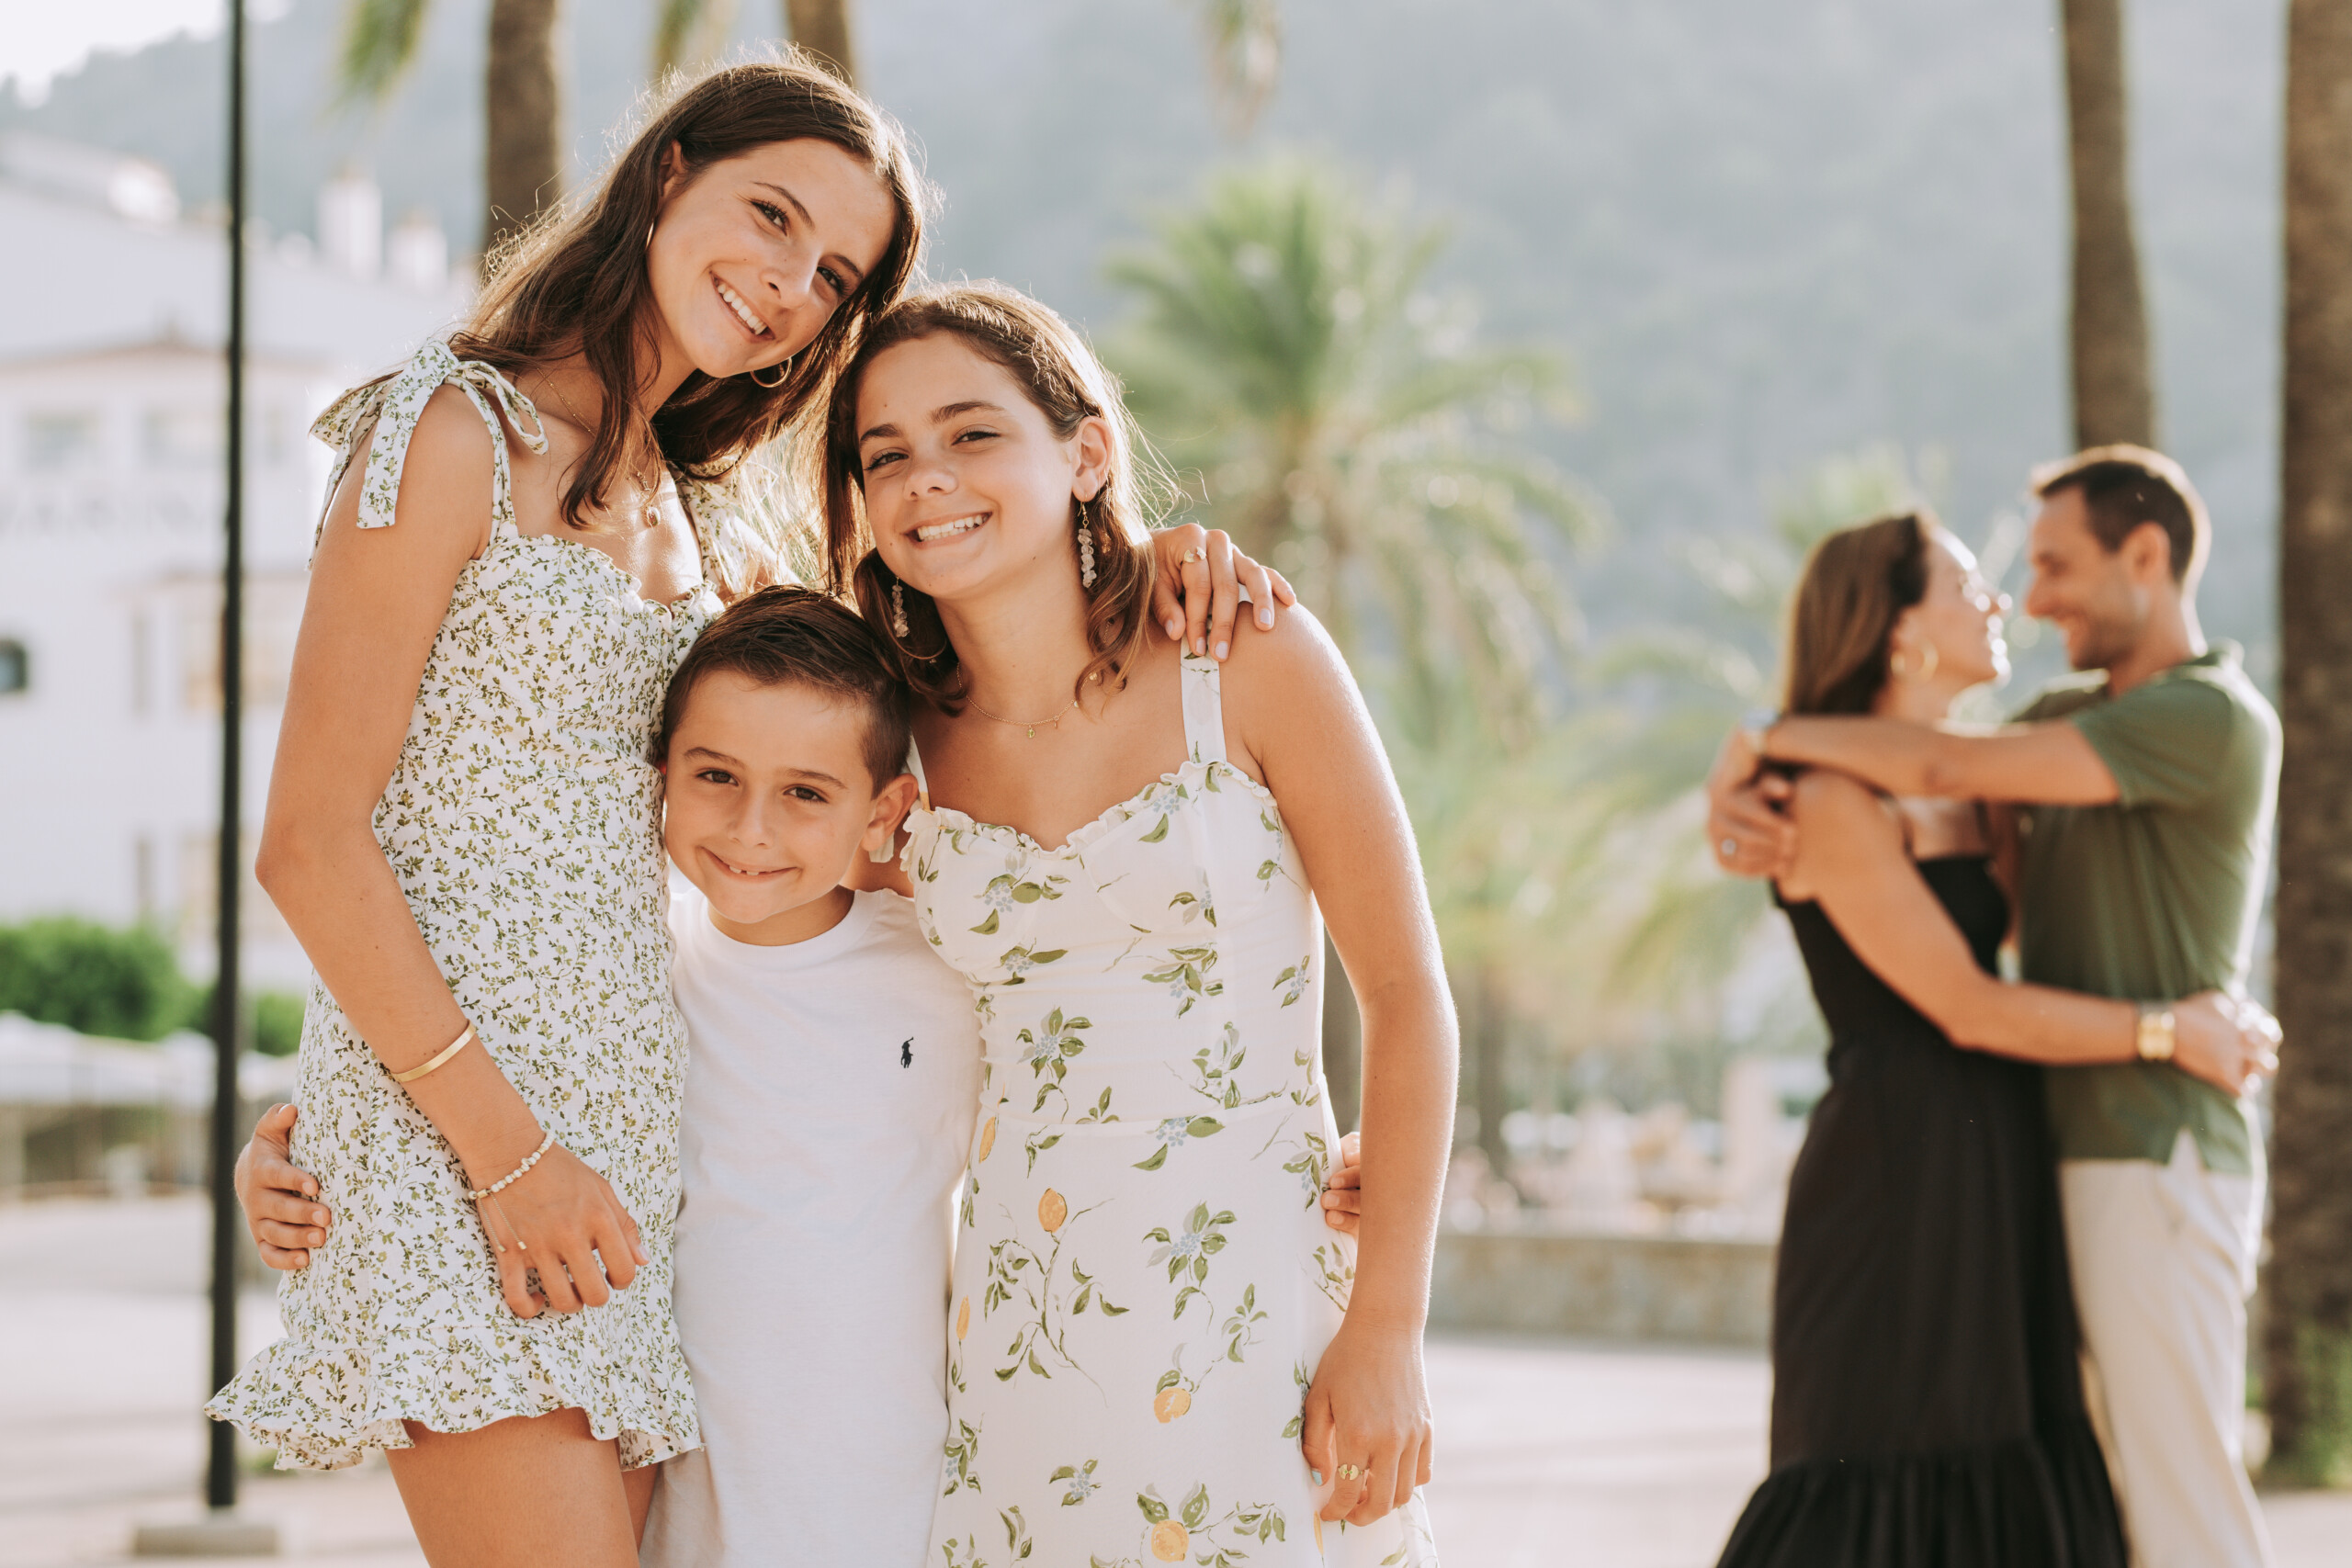 Family photoshoot by Laura, Localgrapher in Mallorca